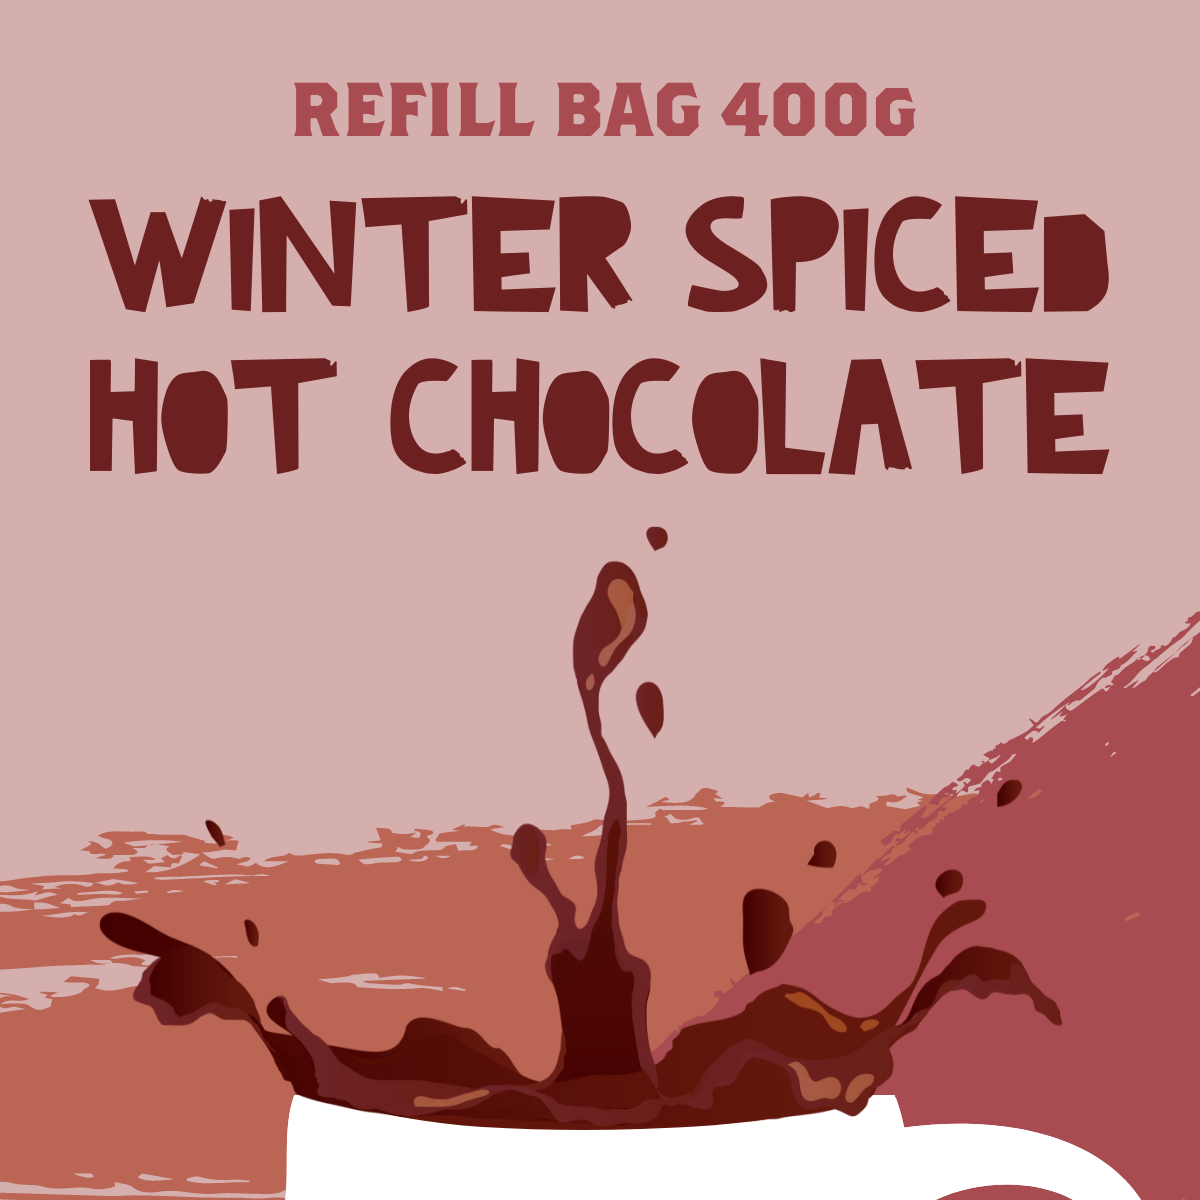 Winter Spiced Chocolate Flakes Refill Bag